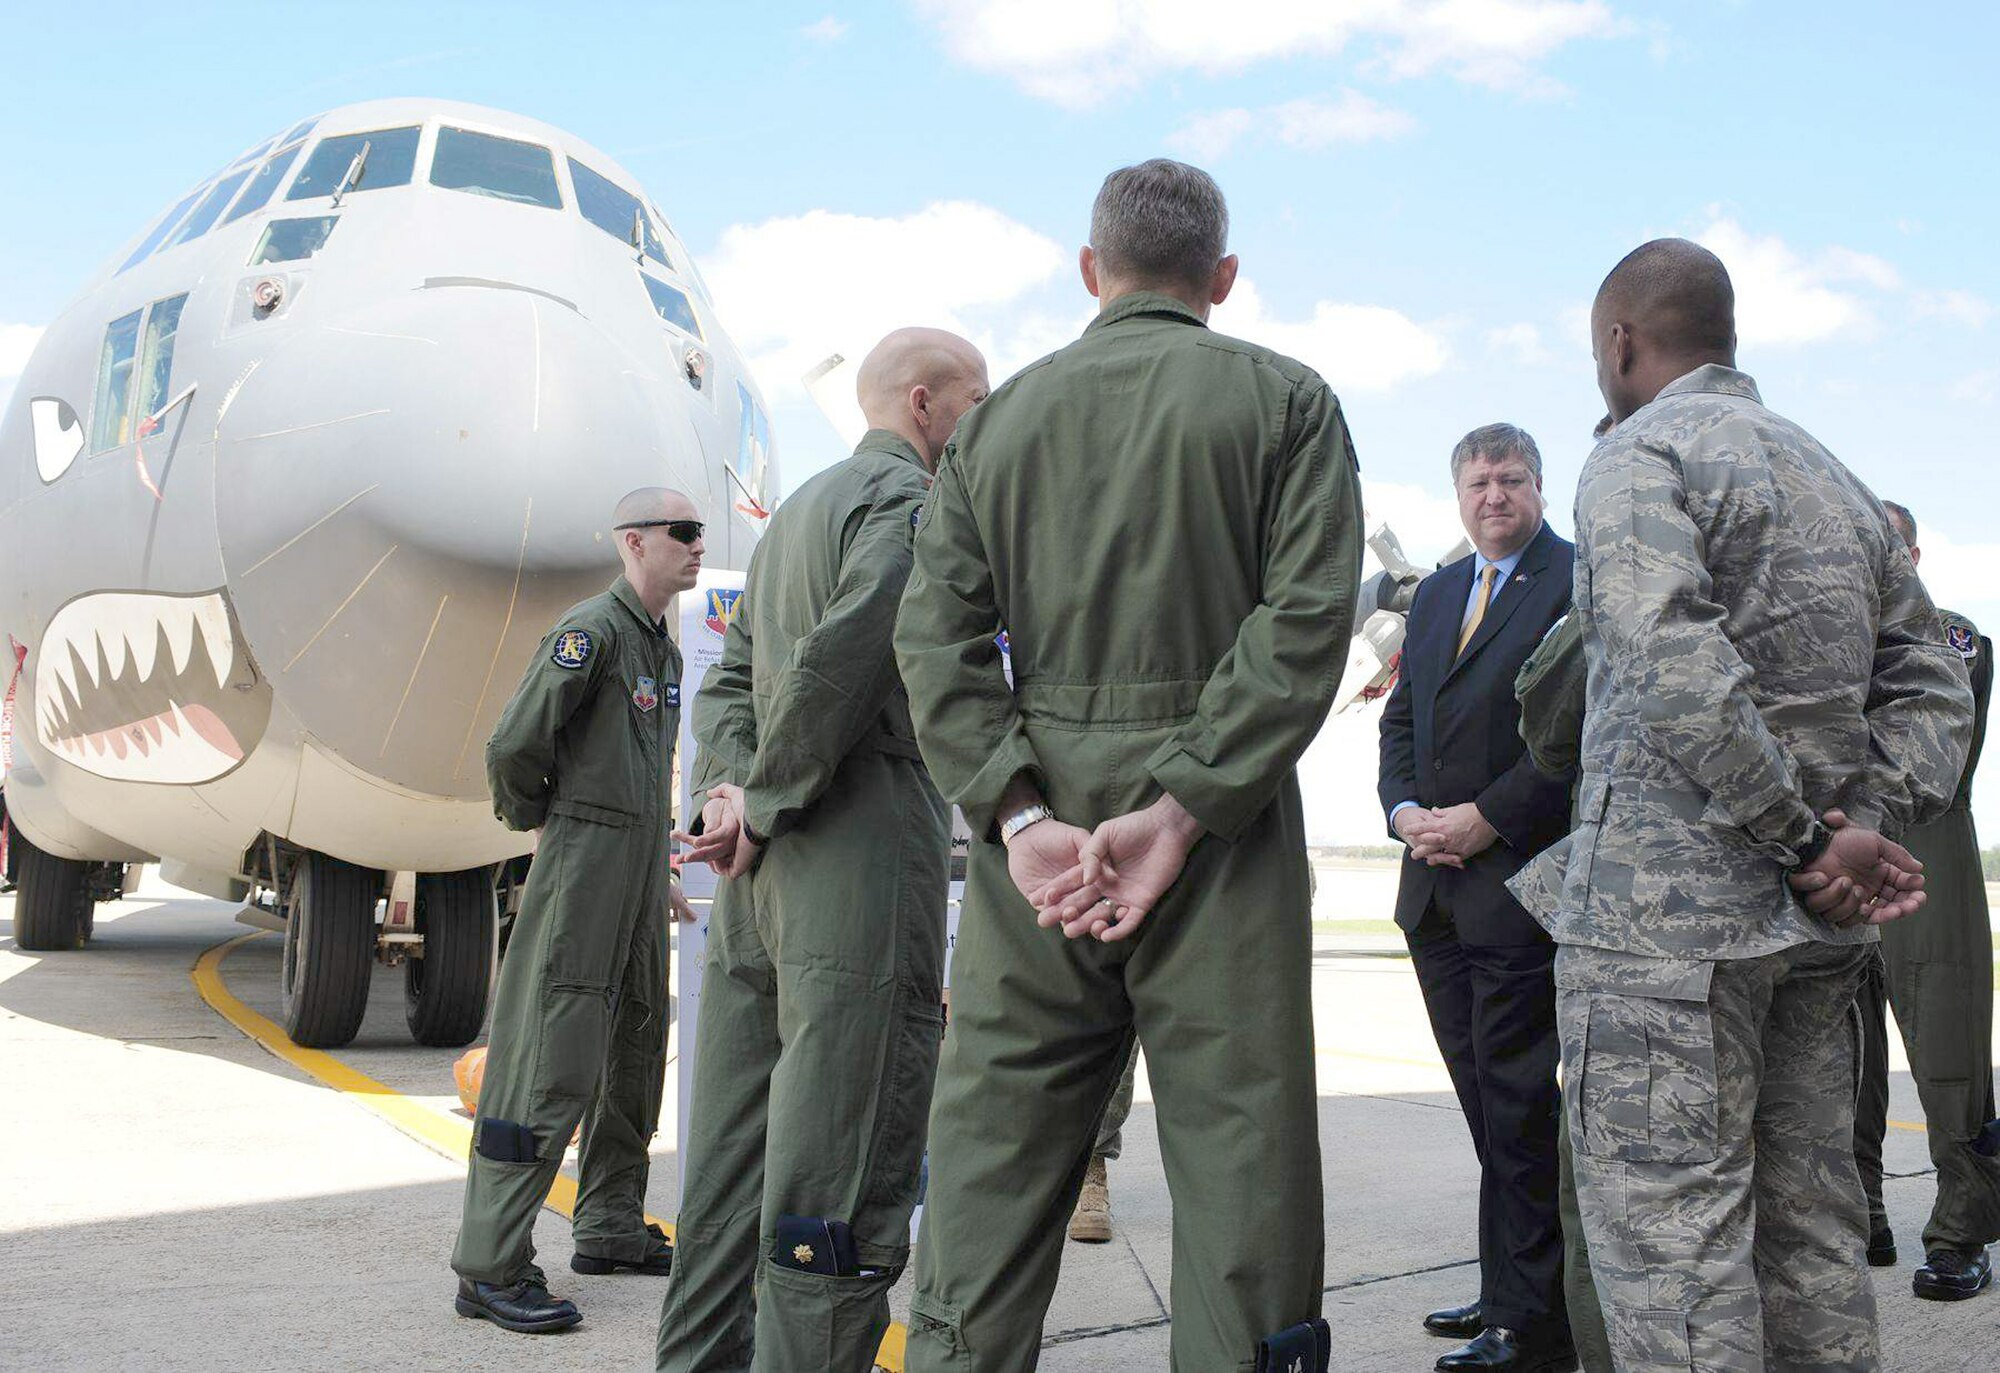 Secretary of the Air Force Michael Donley is briefed on the mission of the HC-130P King by members of the 71st Rescue Squadron March 8, 2011, at Moody Air Force Base, Ga. (U.S. Air Force photo/Senior Airman Stephanie Mancha)